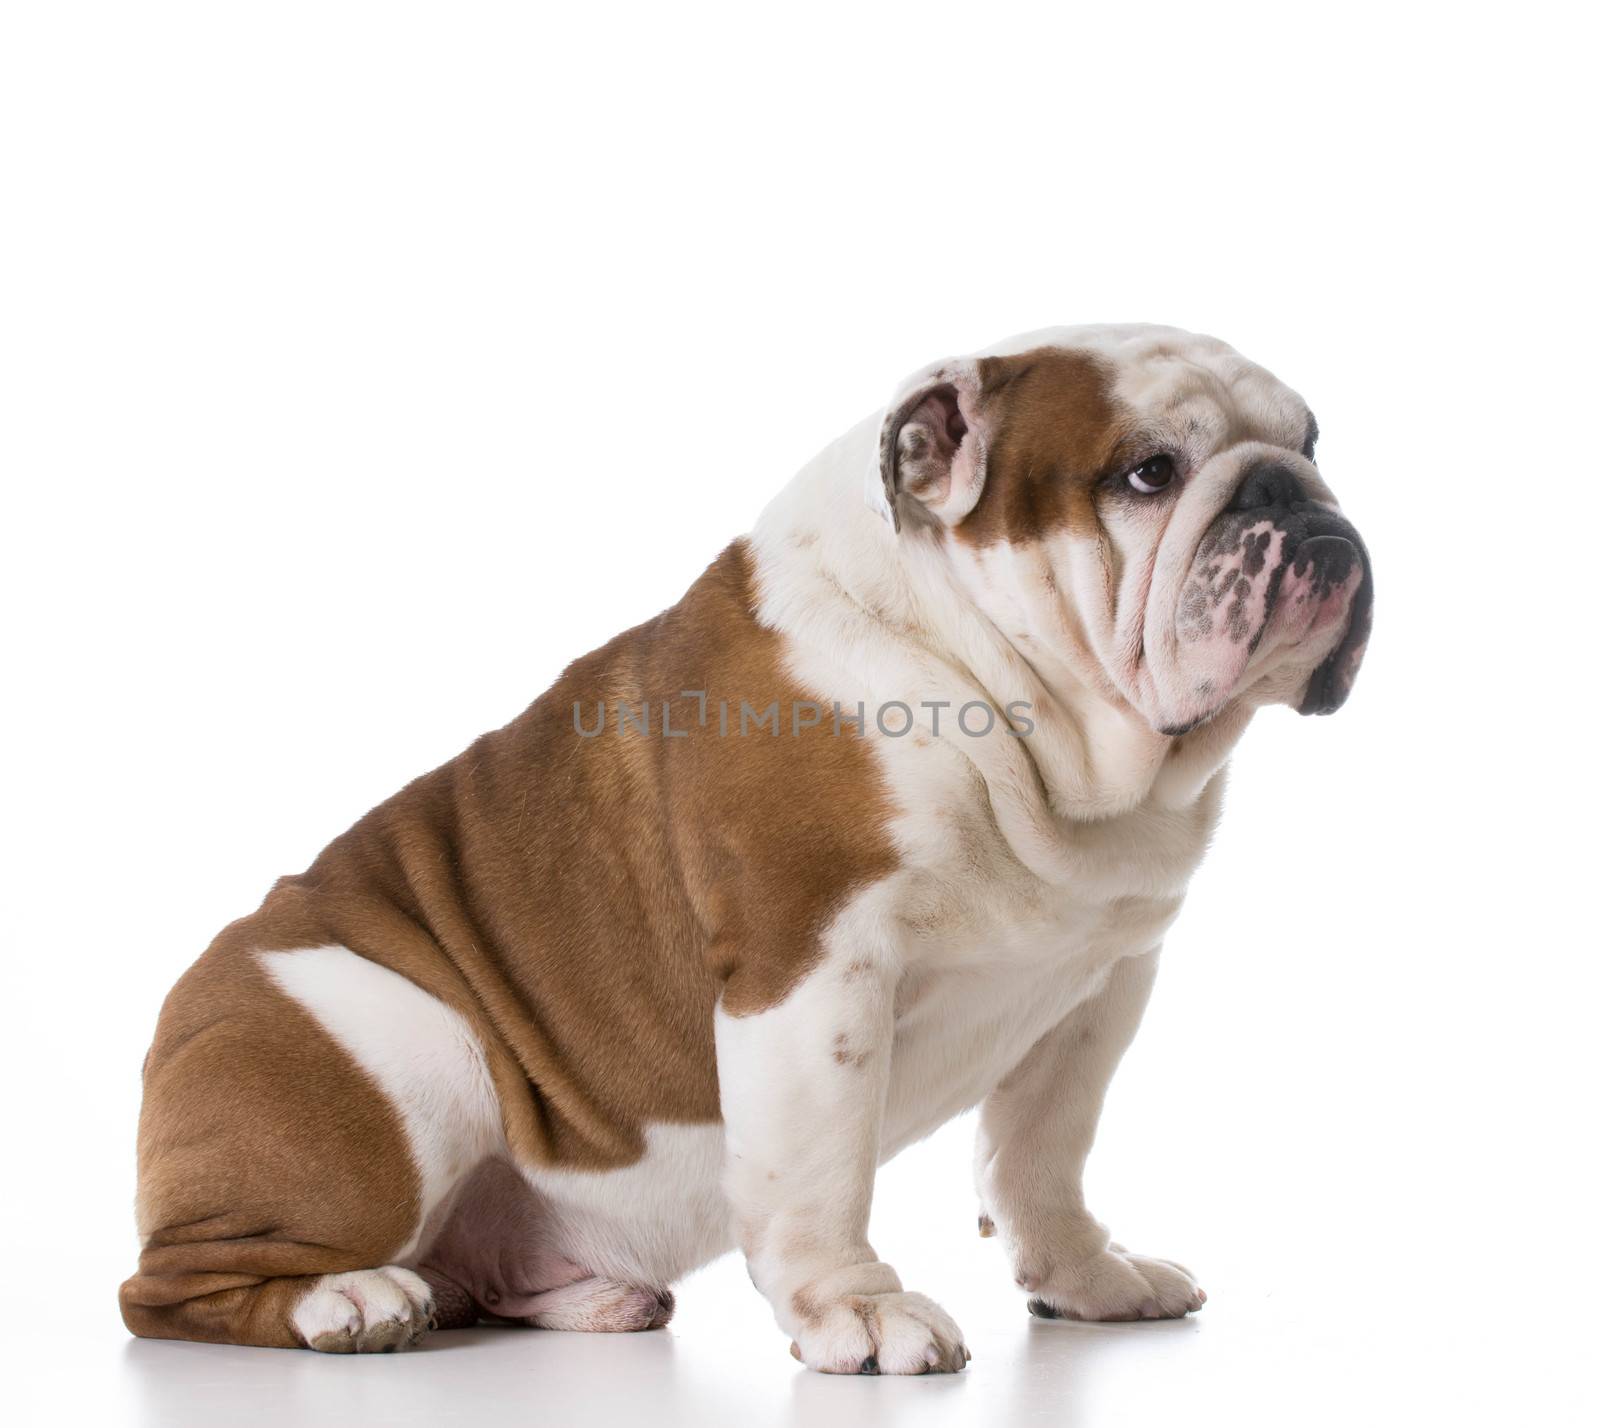 guilty looking dog - bulldog with sad expression sitting on white background